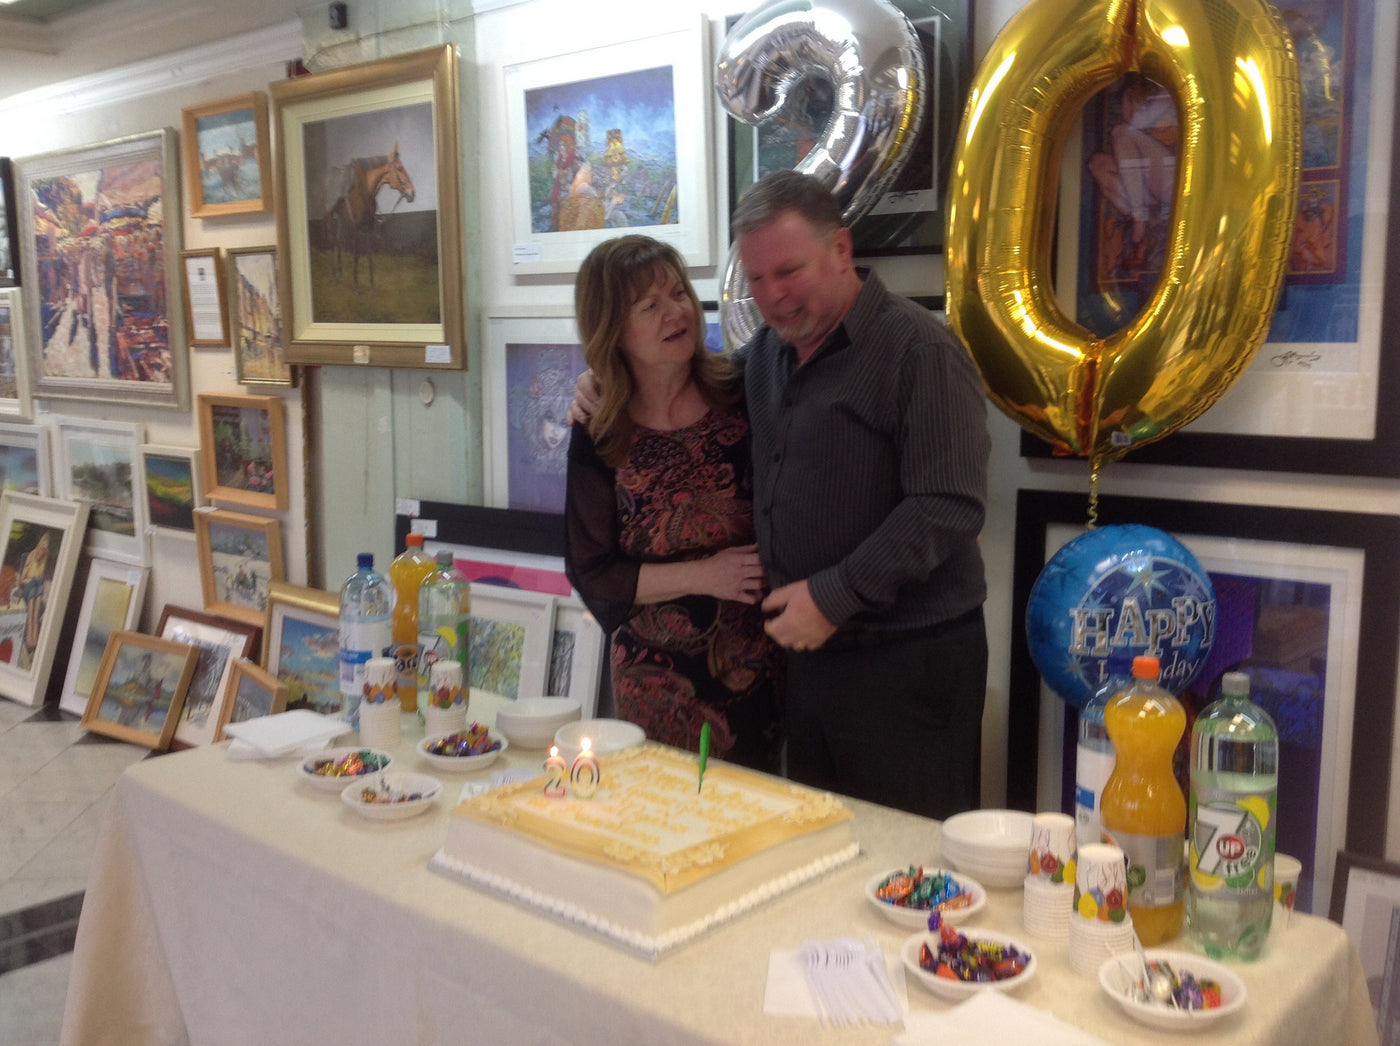 Dermot and Phyl cut the Cake - Green Gallery